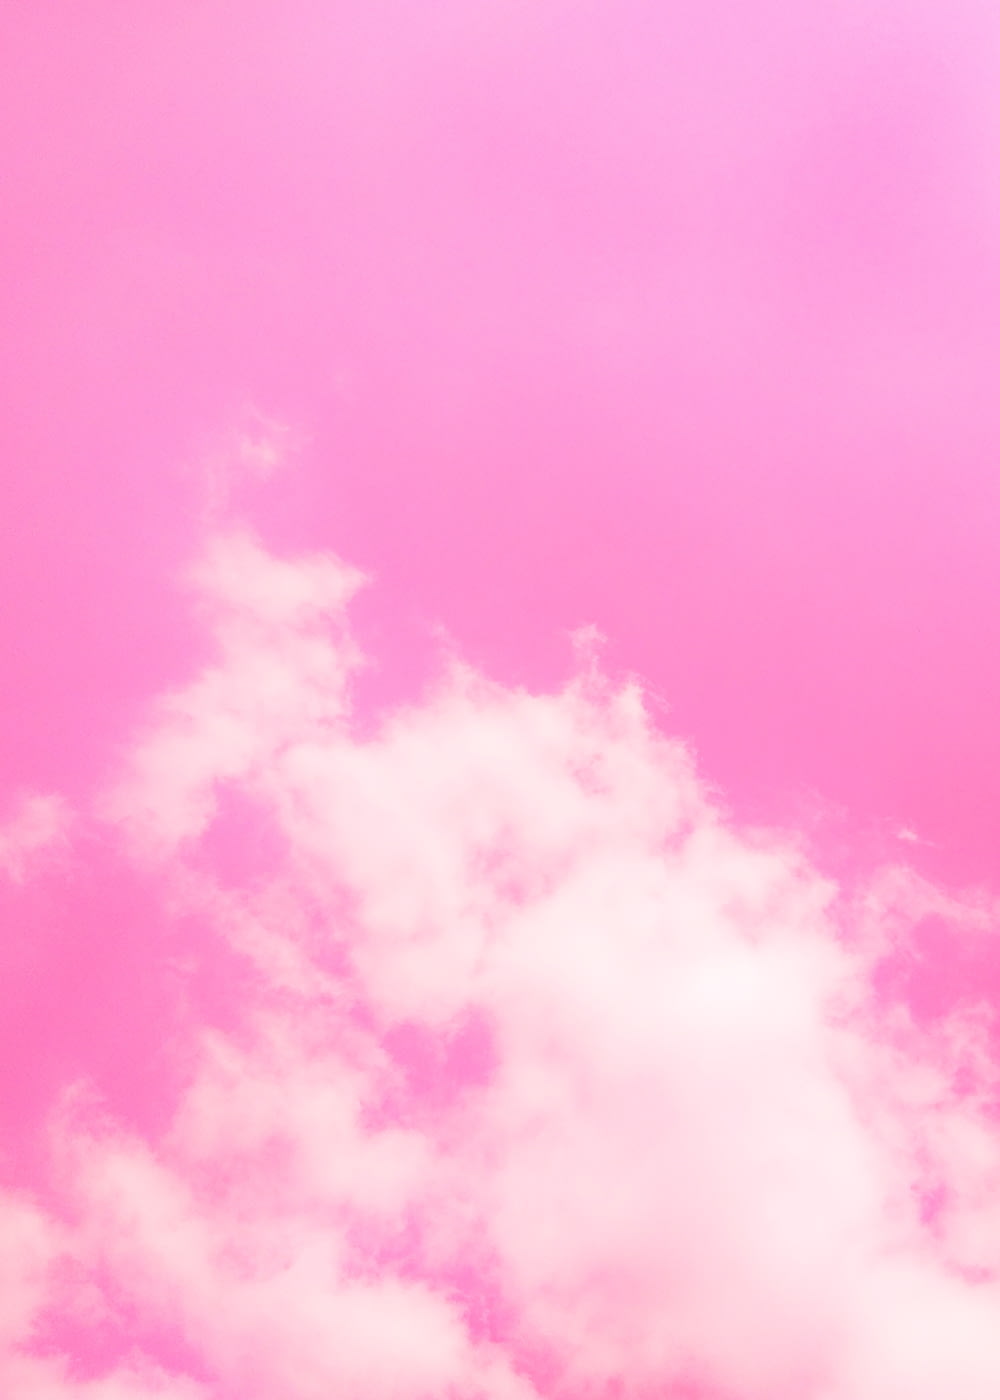 pink and white clouds during daytime